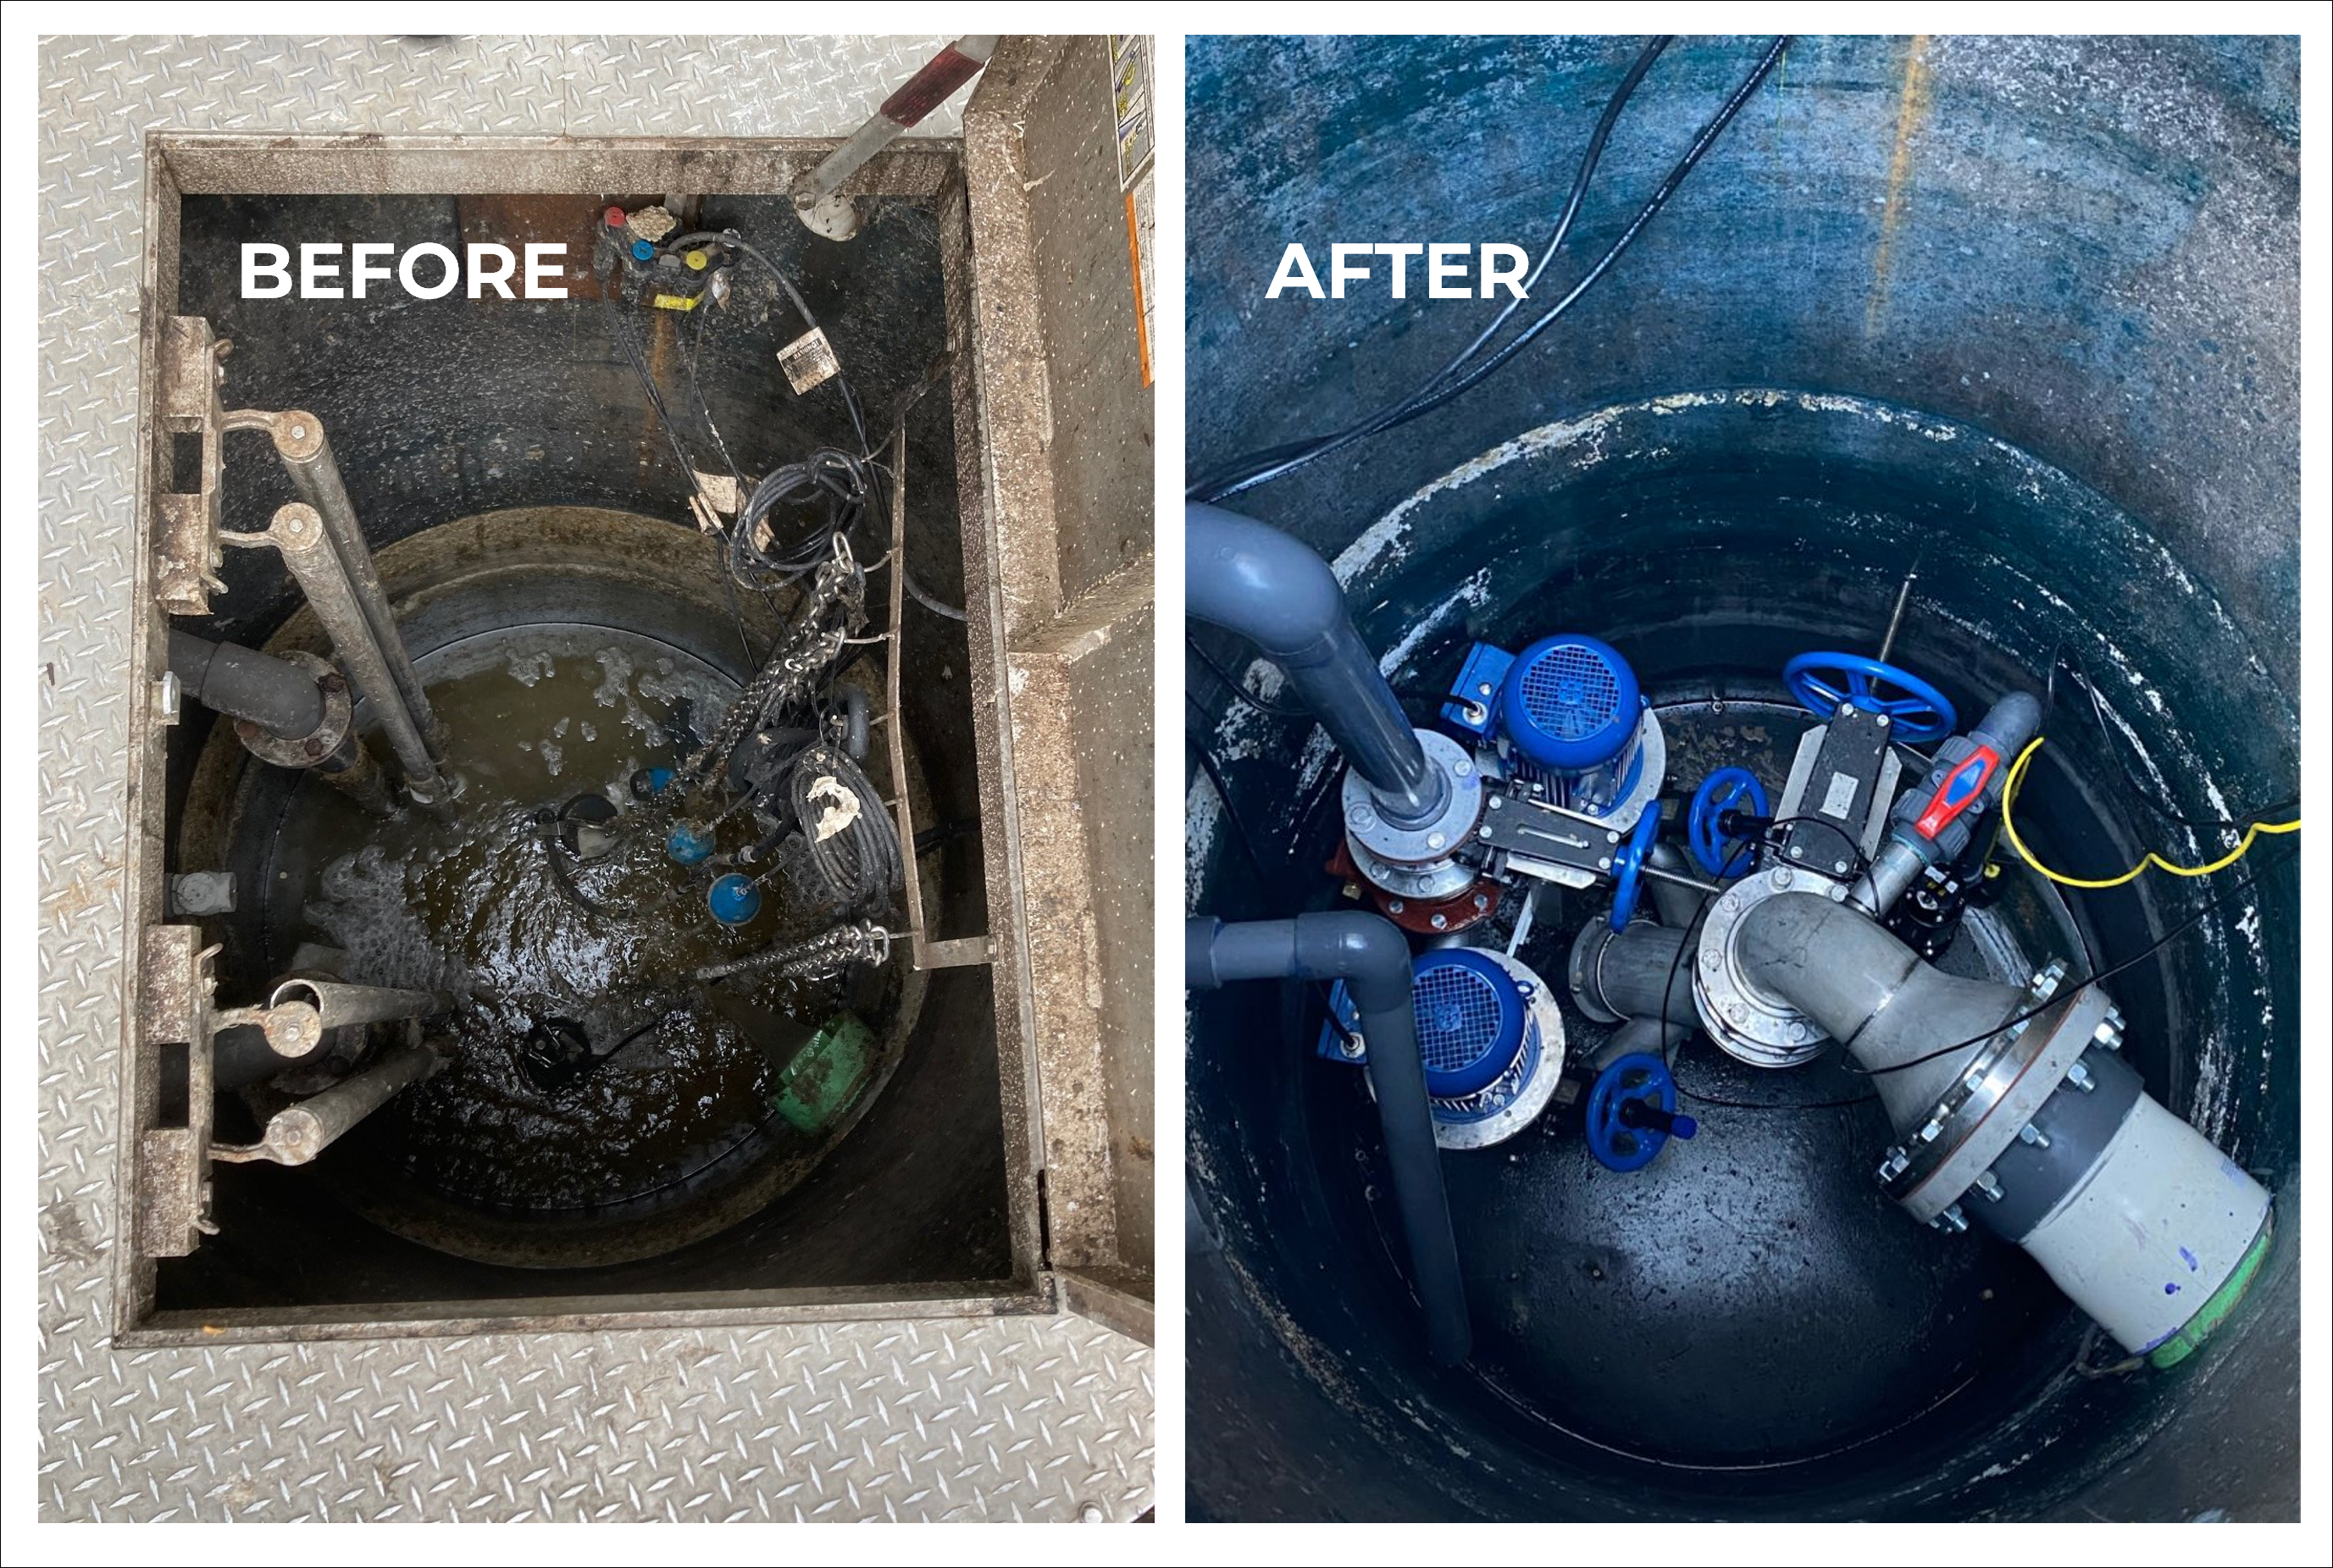 “Flushable” wipes plagued an Austin, TX high-rise until an OverWatch™ Direct In-Line Pump System was installed to save the day